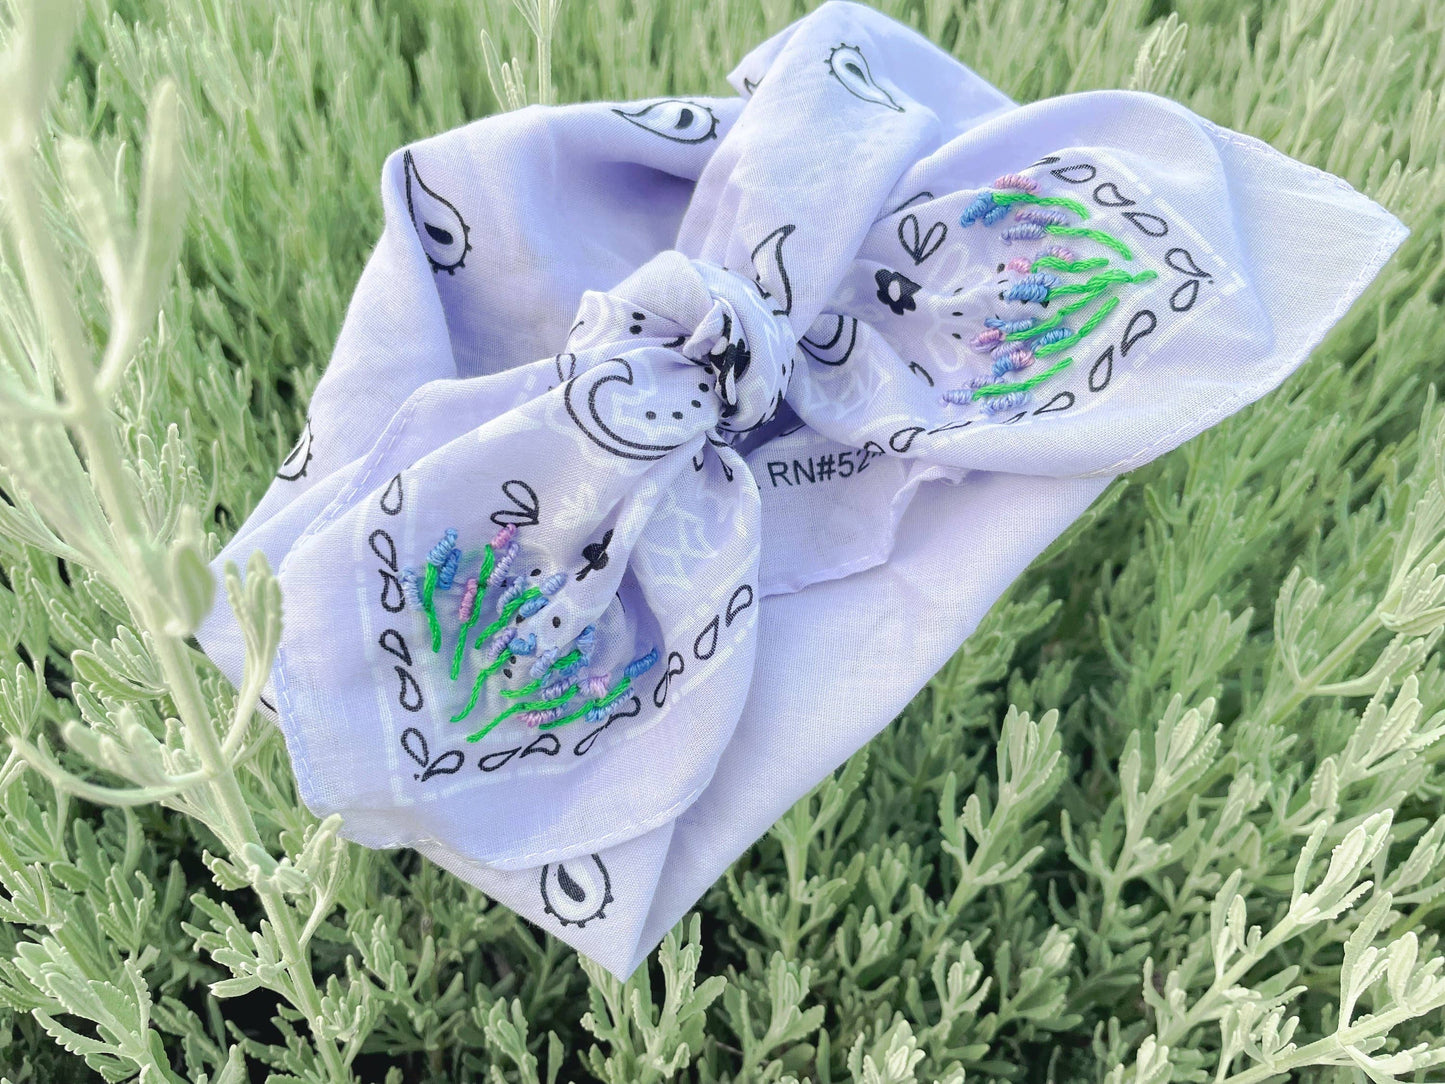 Purple Bandana With Embroidered Lavender Flowers